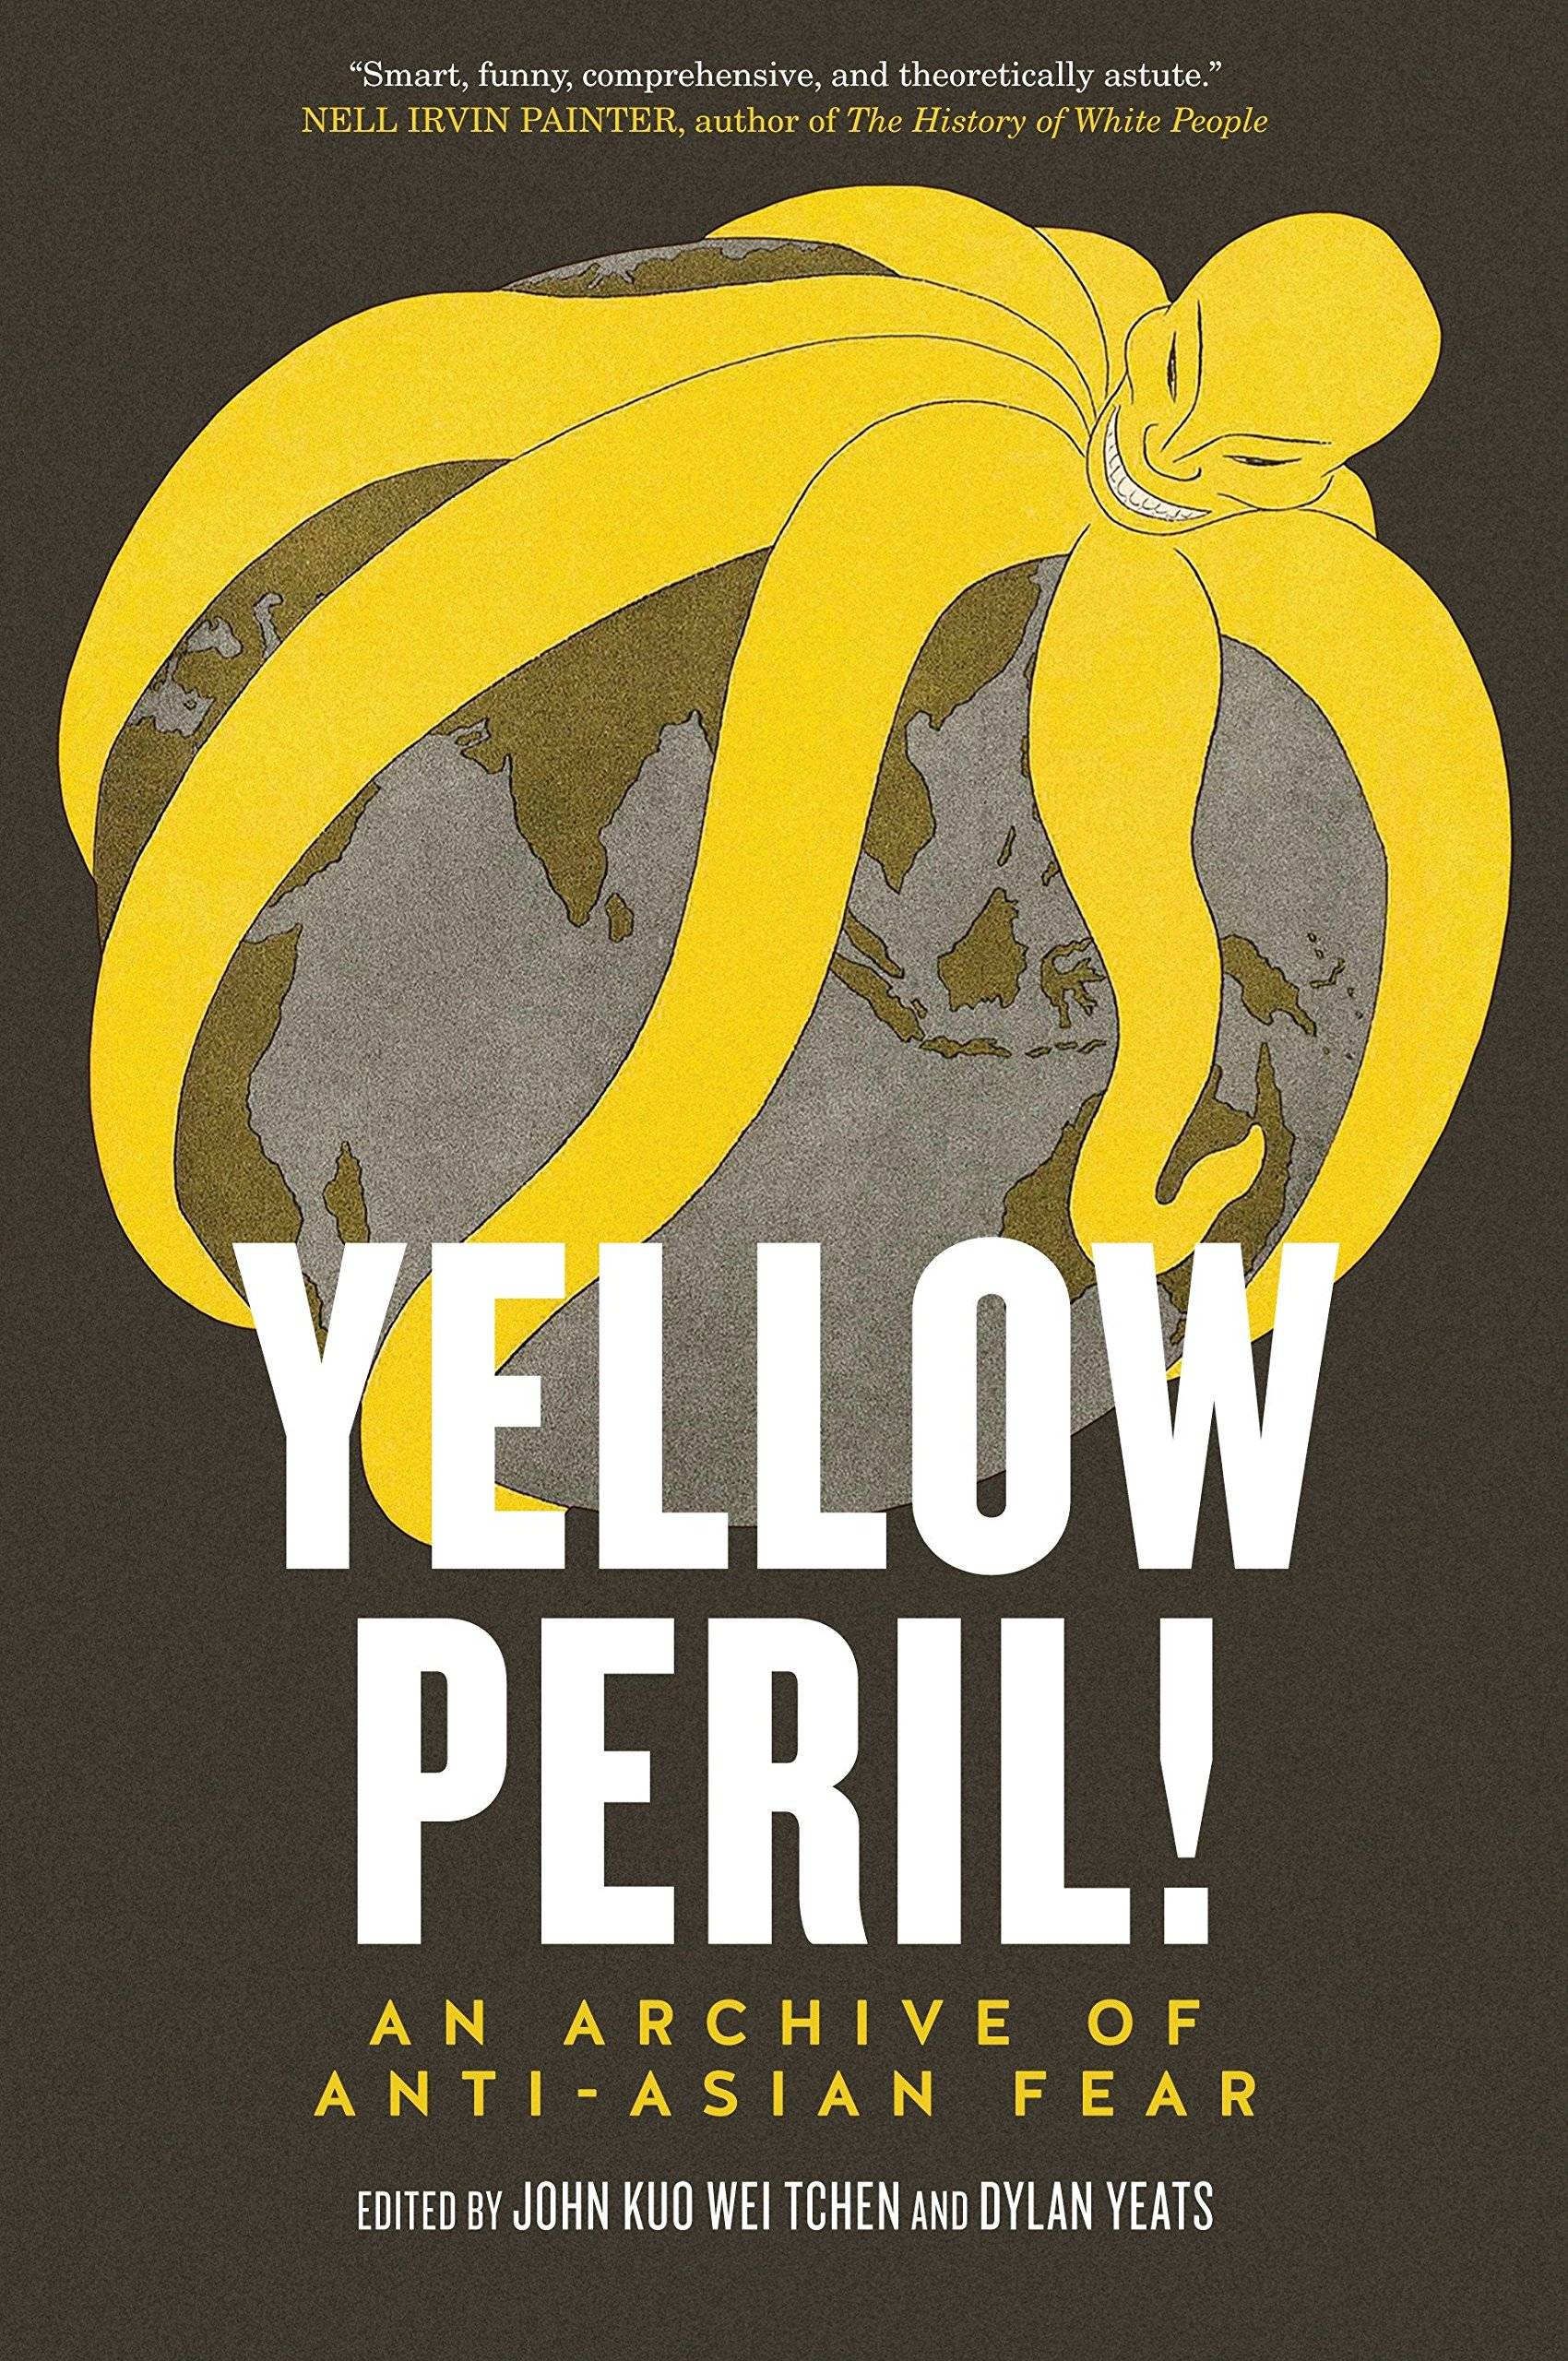 "Yellow Peril" book cover featuring a yellow octopus-like creature overtaking the earth.